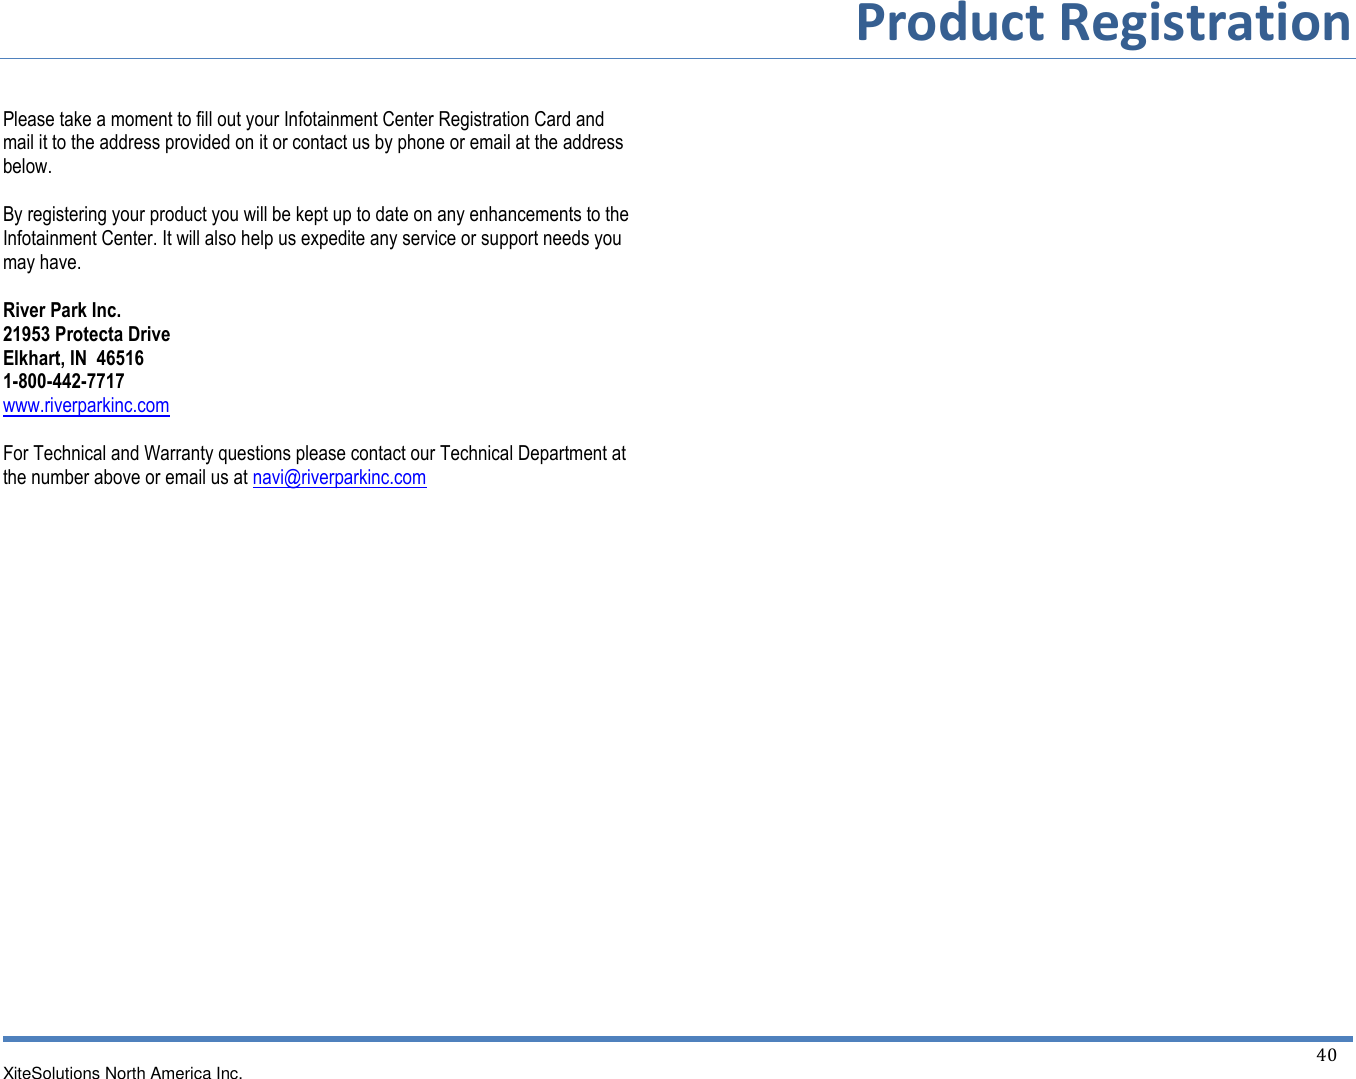        Product Registration  XiteSolutions North America Inc.  40   Please take a moment to fill out your Infotainment Center Registration Card and mail it to the address provided on it or contact us by phone or email at the address below.  By registering your product you will be kept up to date on any enhancements to the Infotainment Center. It will also help us expedite any service or support needs you may have.  River Park Inc. 21953 Protecta Drive Elkhart, IN  46516 1-800-442-7717 www.riverparkinc.com  For Technical and Warranty questions please contact our Technical Department at the number above or email us at navi@riverparkinc.com 